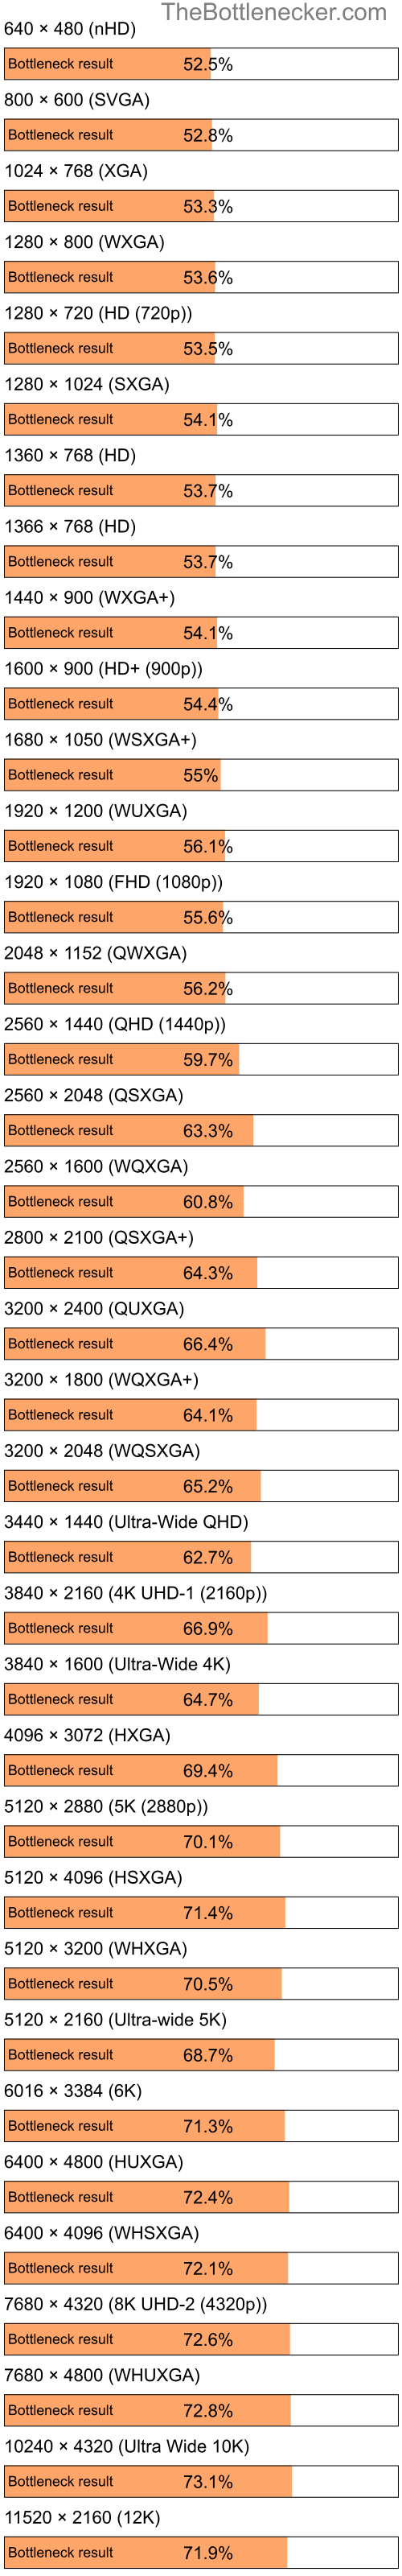 Bottleneck results by resolution for Intel Atom N270 and NVIDIA Quadro FX 4400 in Processor Intense Tasks